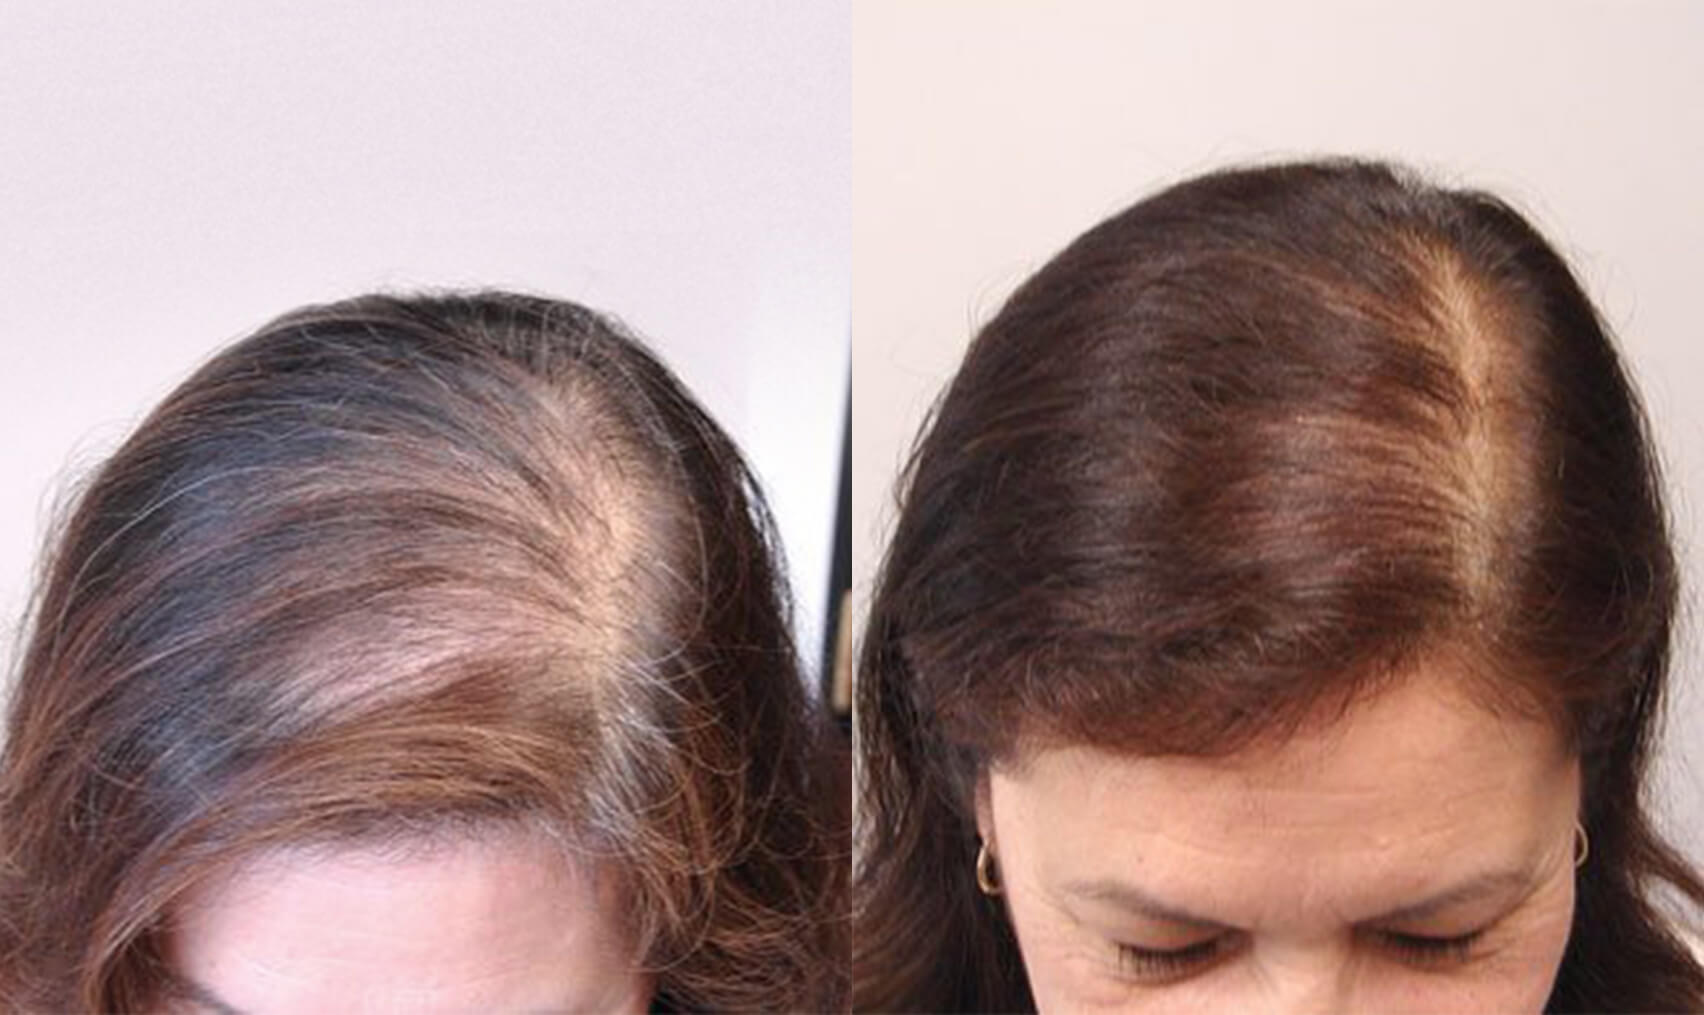 RF treatment for Hair(radio frequency)